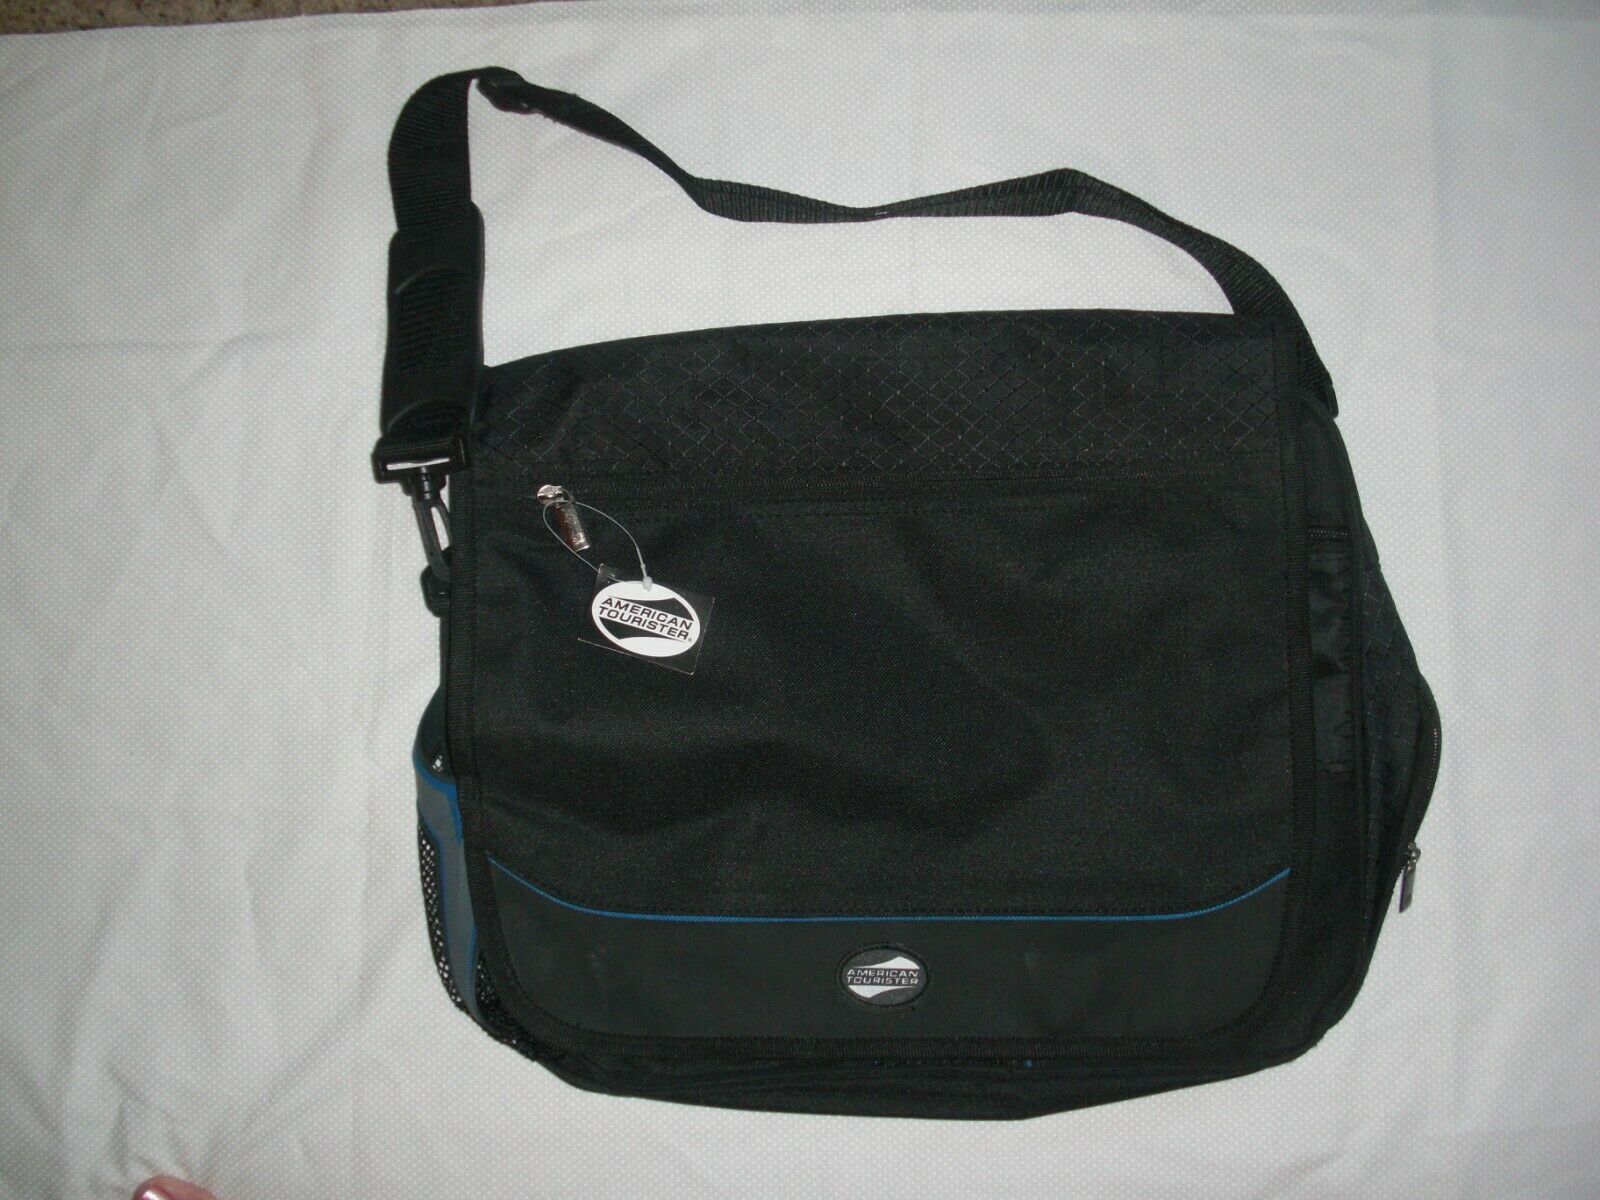 Primary image for American Tourister Black Messenger/Laptop Shoulder Bag/Carry Handle New W/T